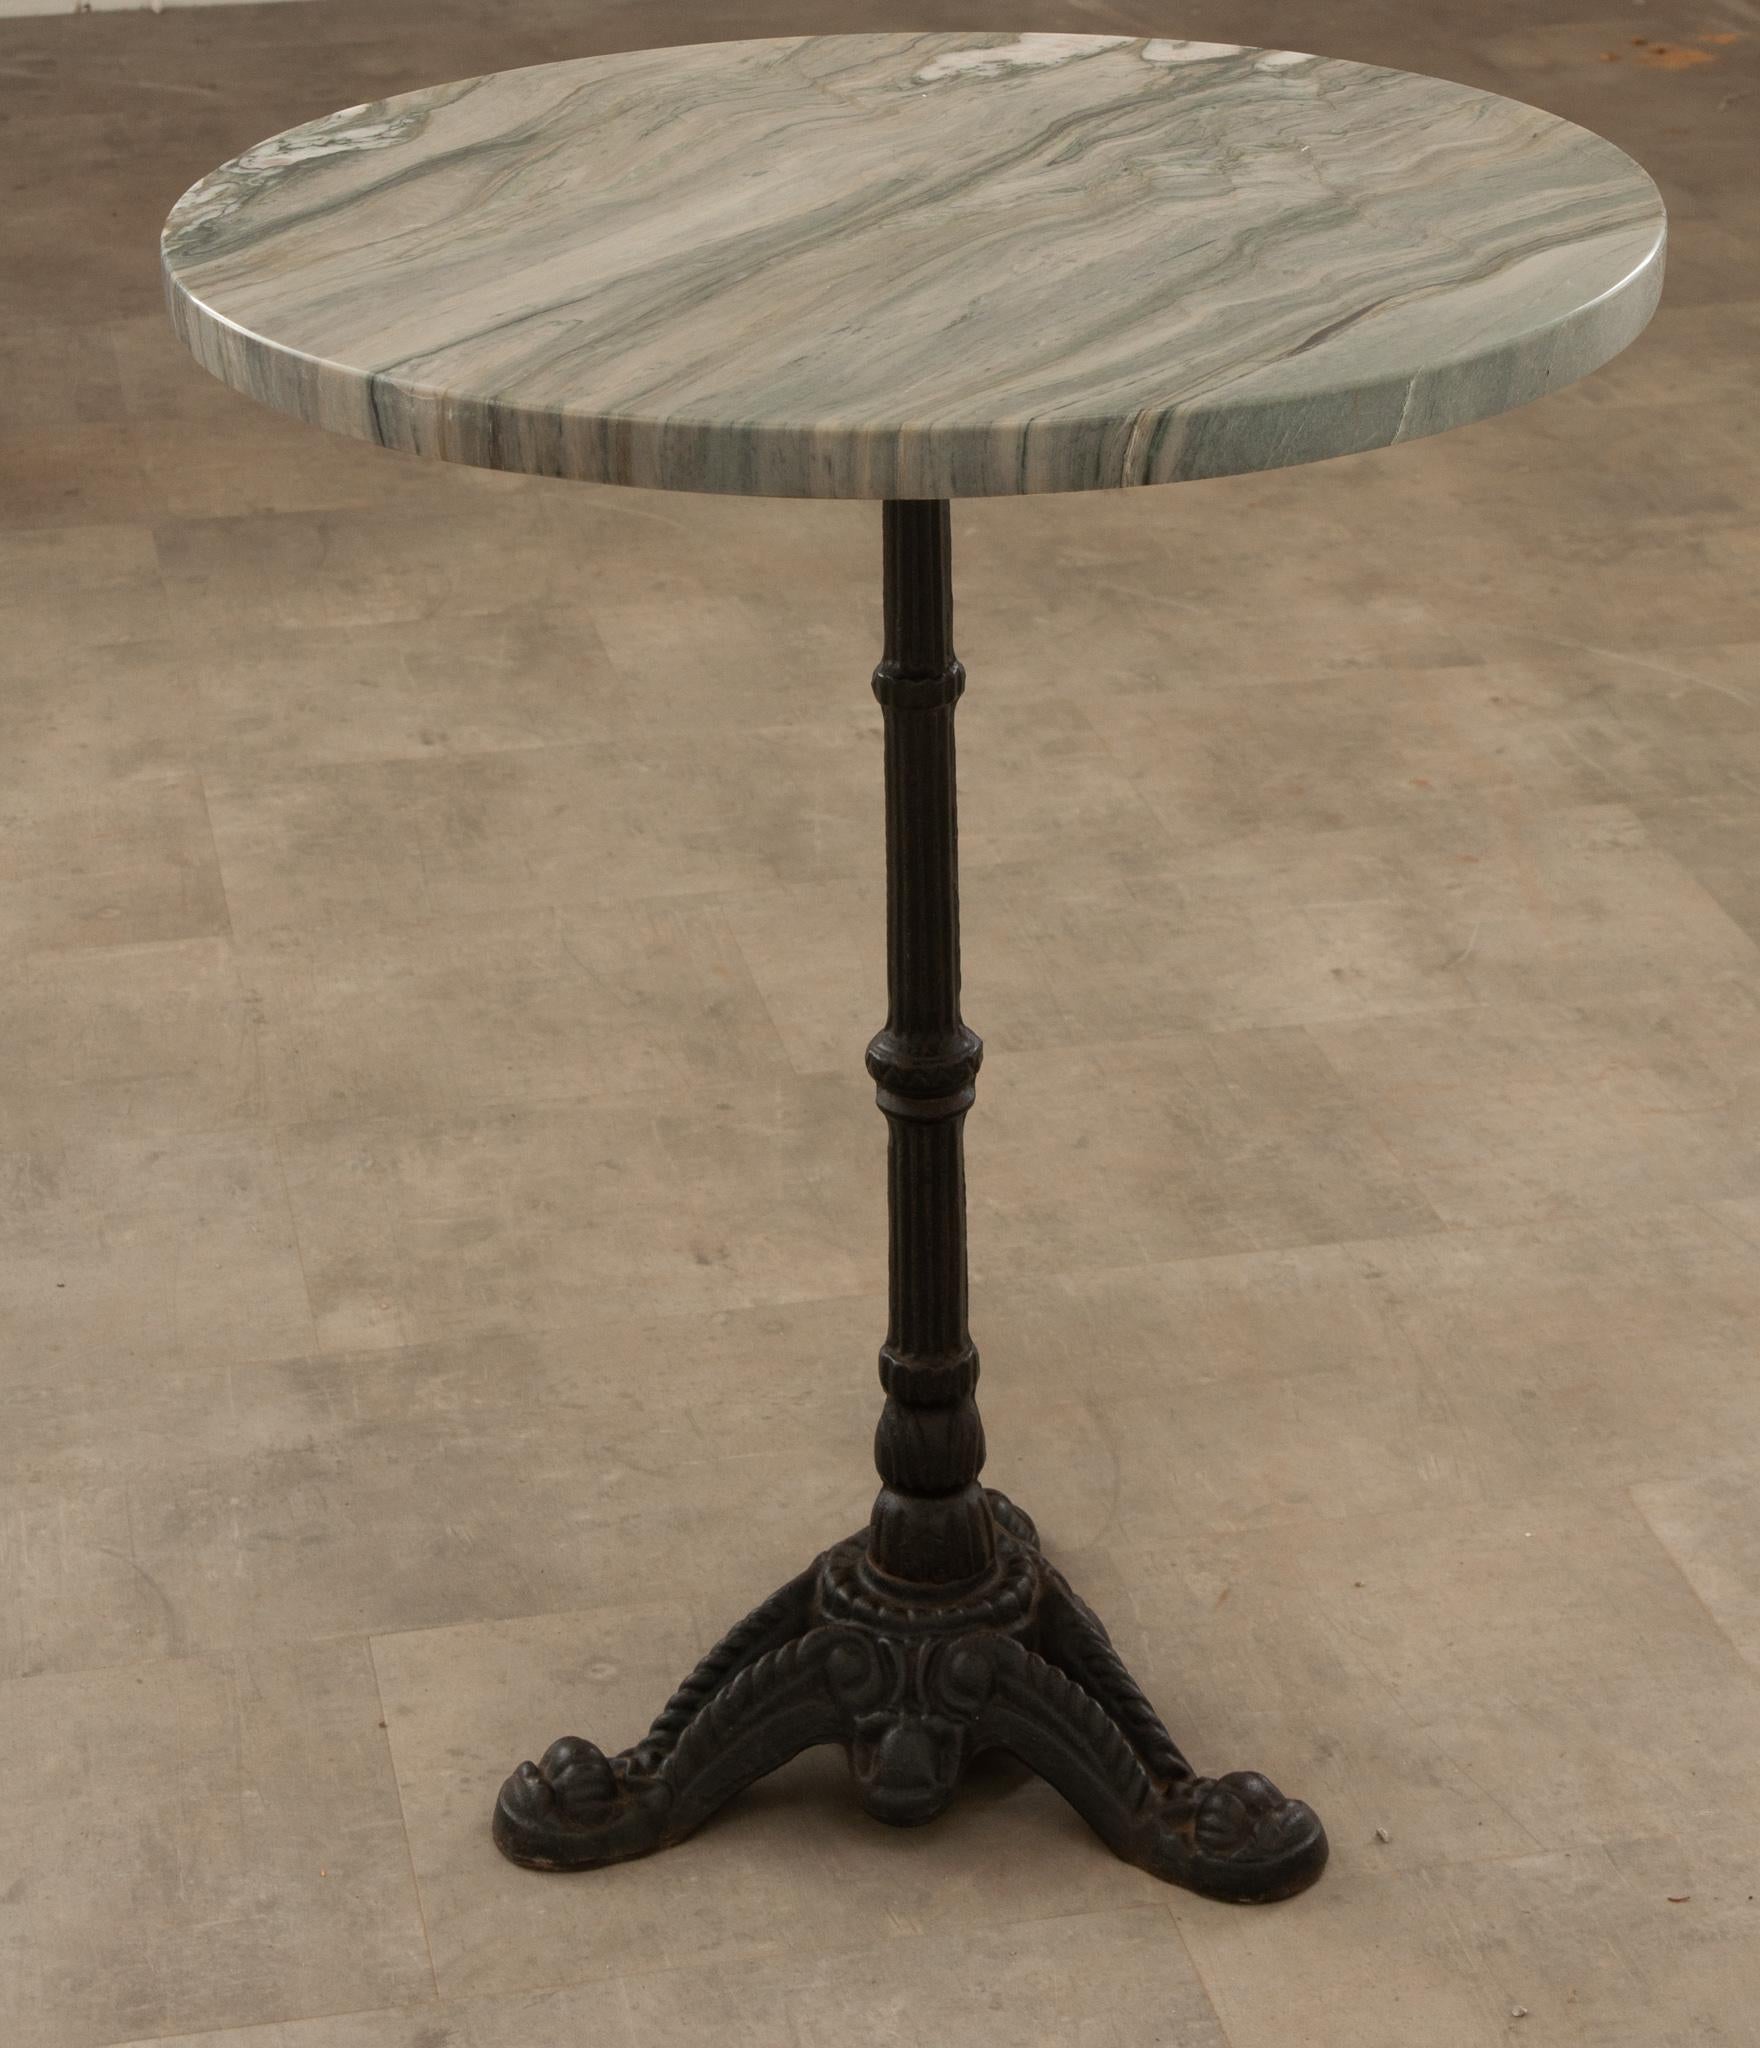 A classically designed French marble top bistro table to elevate any outdoor space. The wonderful new fusion stone top is affixed to the cast iron base and remains quite level. A three foot base continues to provide a stable foundation. The whole